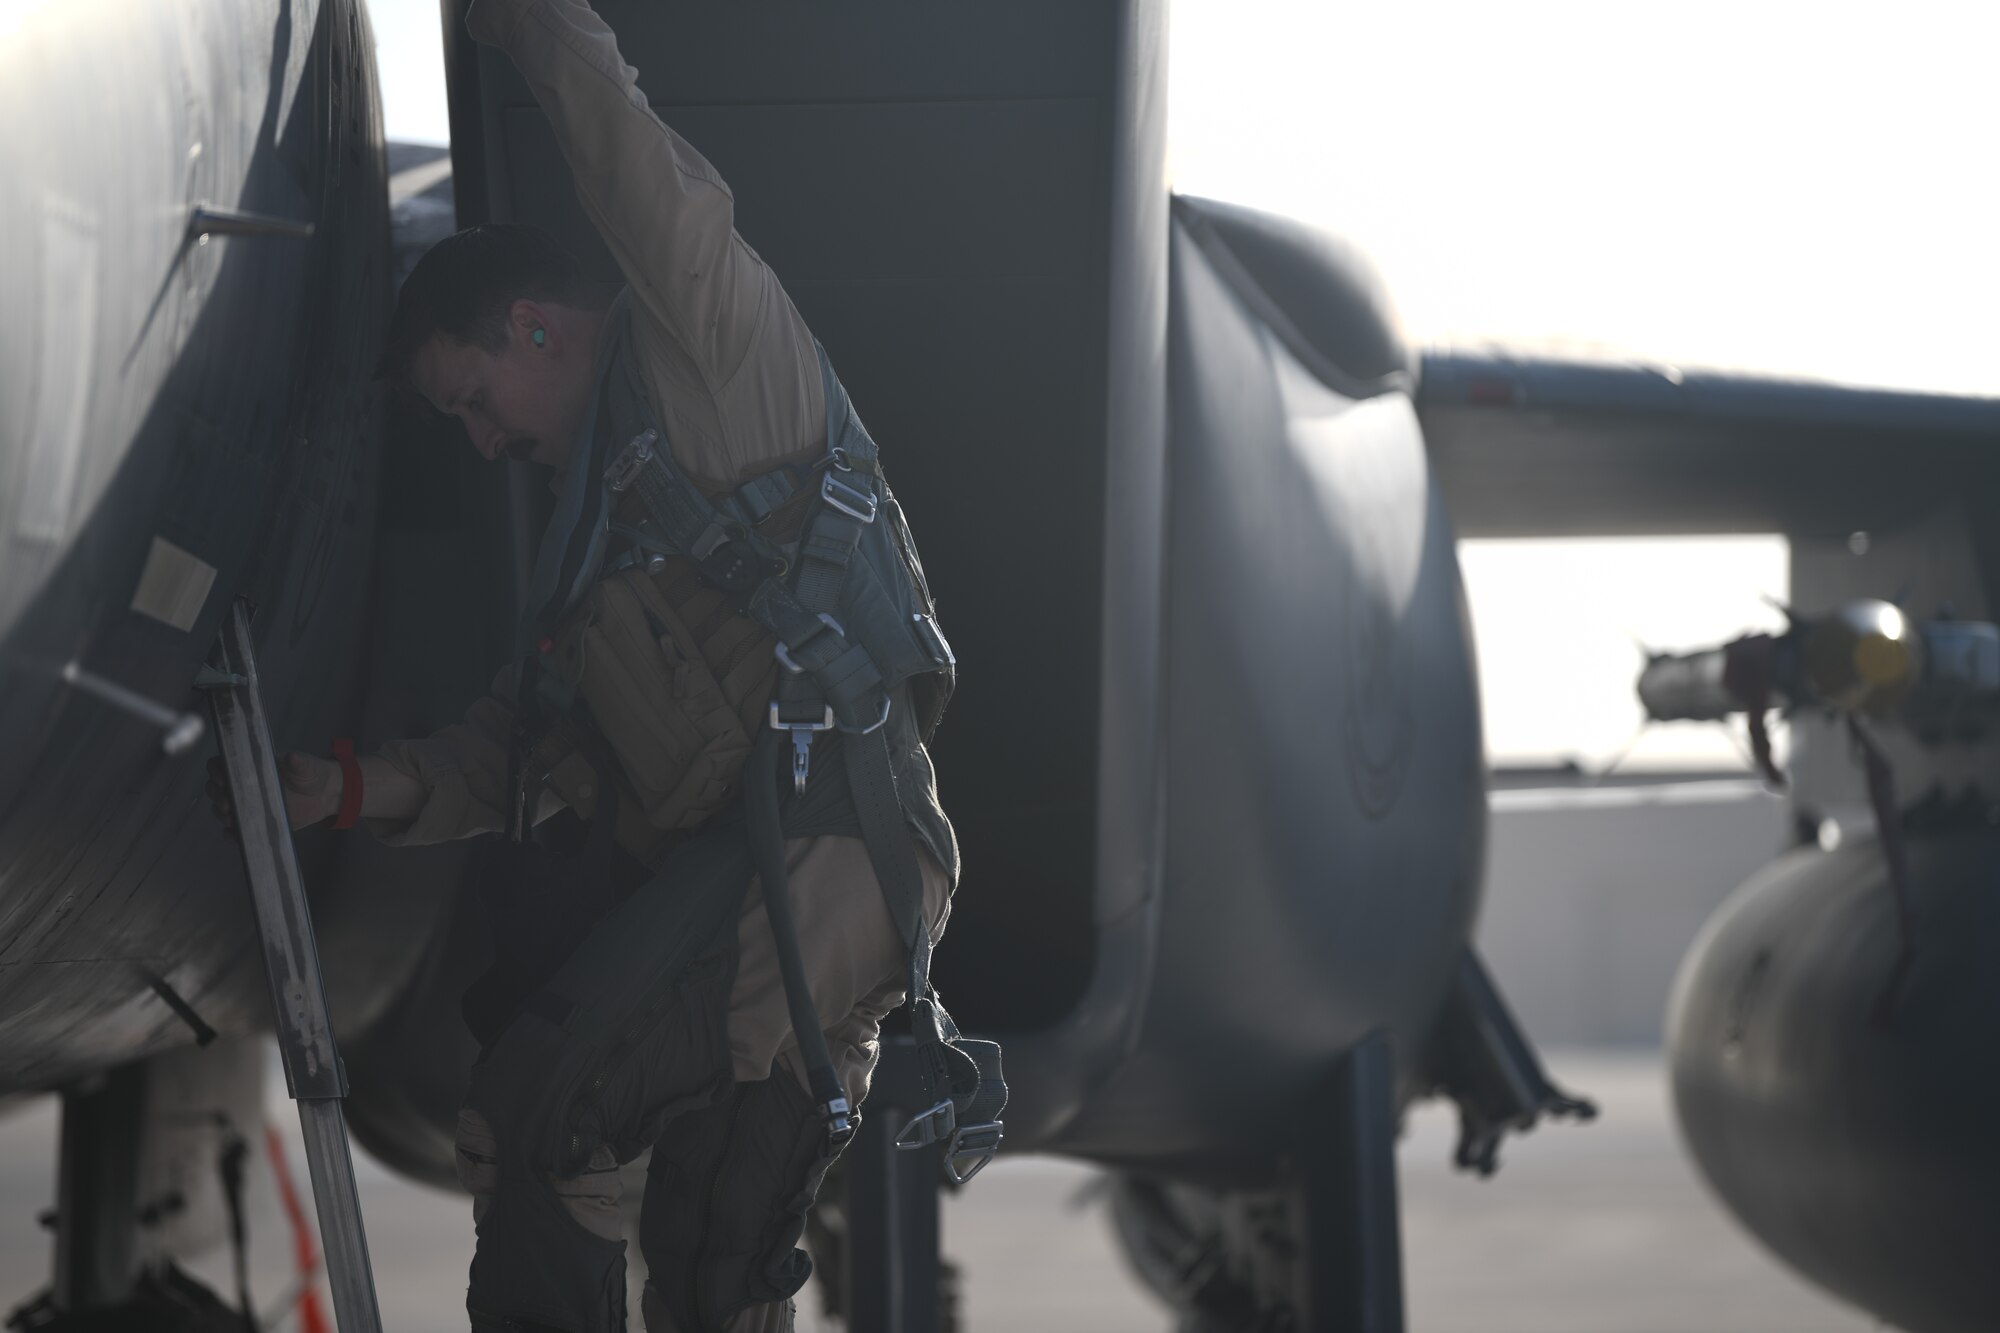 U.S. Air Force Staff Sgt. Zackary Suttles, a crew chief with the 378th Expeditionary Maintenance Squadron, conducts a post landing inspection on an F-15E Strike Eagle at Prince Sultan Air Base, Kingdom of Saudi Arabia, Jan. 4, 2020.